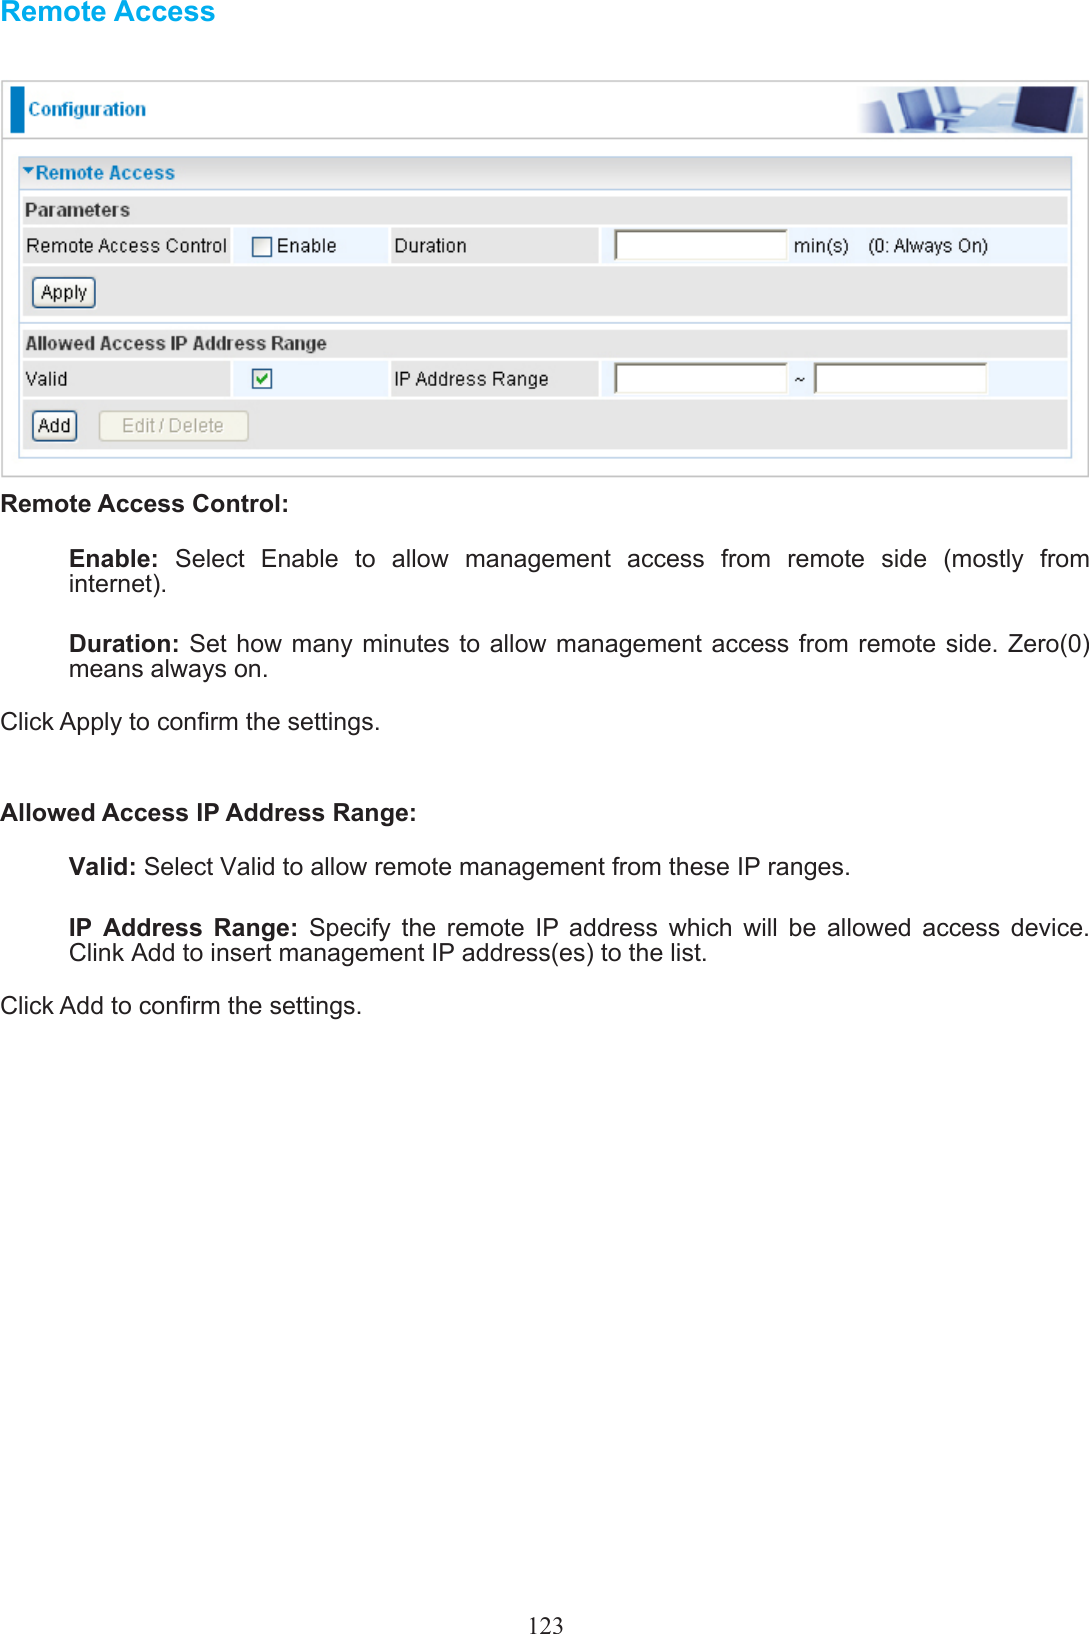 123Remote AccessRemote Access Control: Enable:  Select  Enable  to  allow  management  access  from  remote  side  (mostly  from internet).Duration: Set how many minutes to allow management access  from  remote  side. Zero(0) means always on.Click Apply to conrm the settings.Allowed Access IP Address Range:Valid: Select Valid to allow remote management from these IP ranges. IP  Address  Range:  Specify  the  remote  IP  address  which  will  be  allowed  access  device.  Clink Add to insert management IP address(es) to the list.Click Add to conrm the settings.